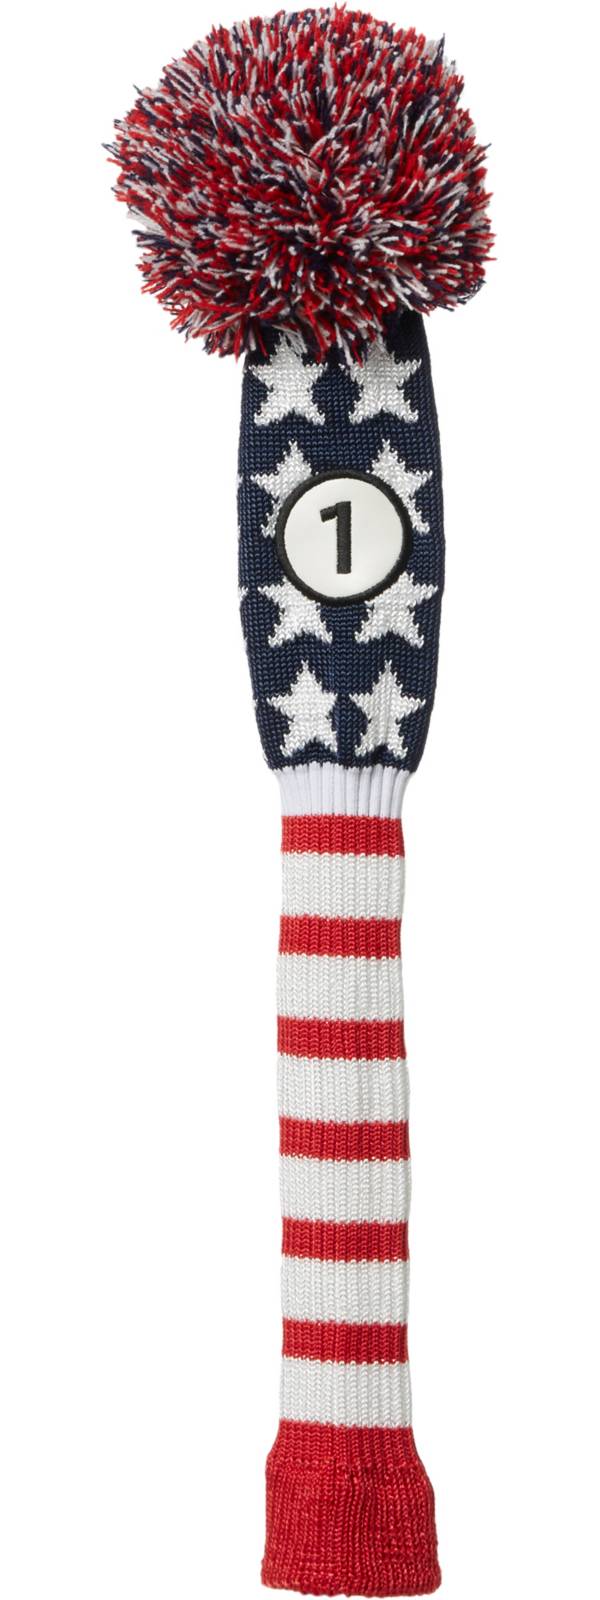 Maxfli Vintage Knit Driver Headcover product image